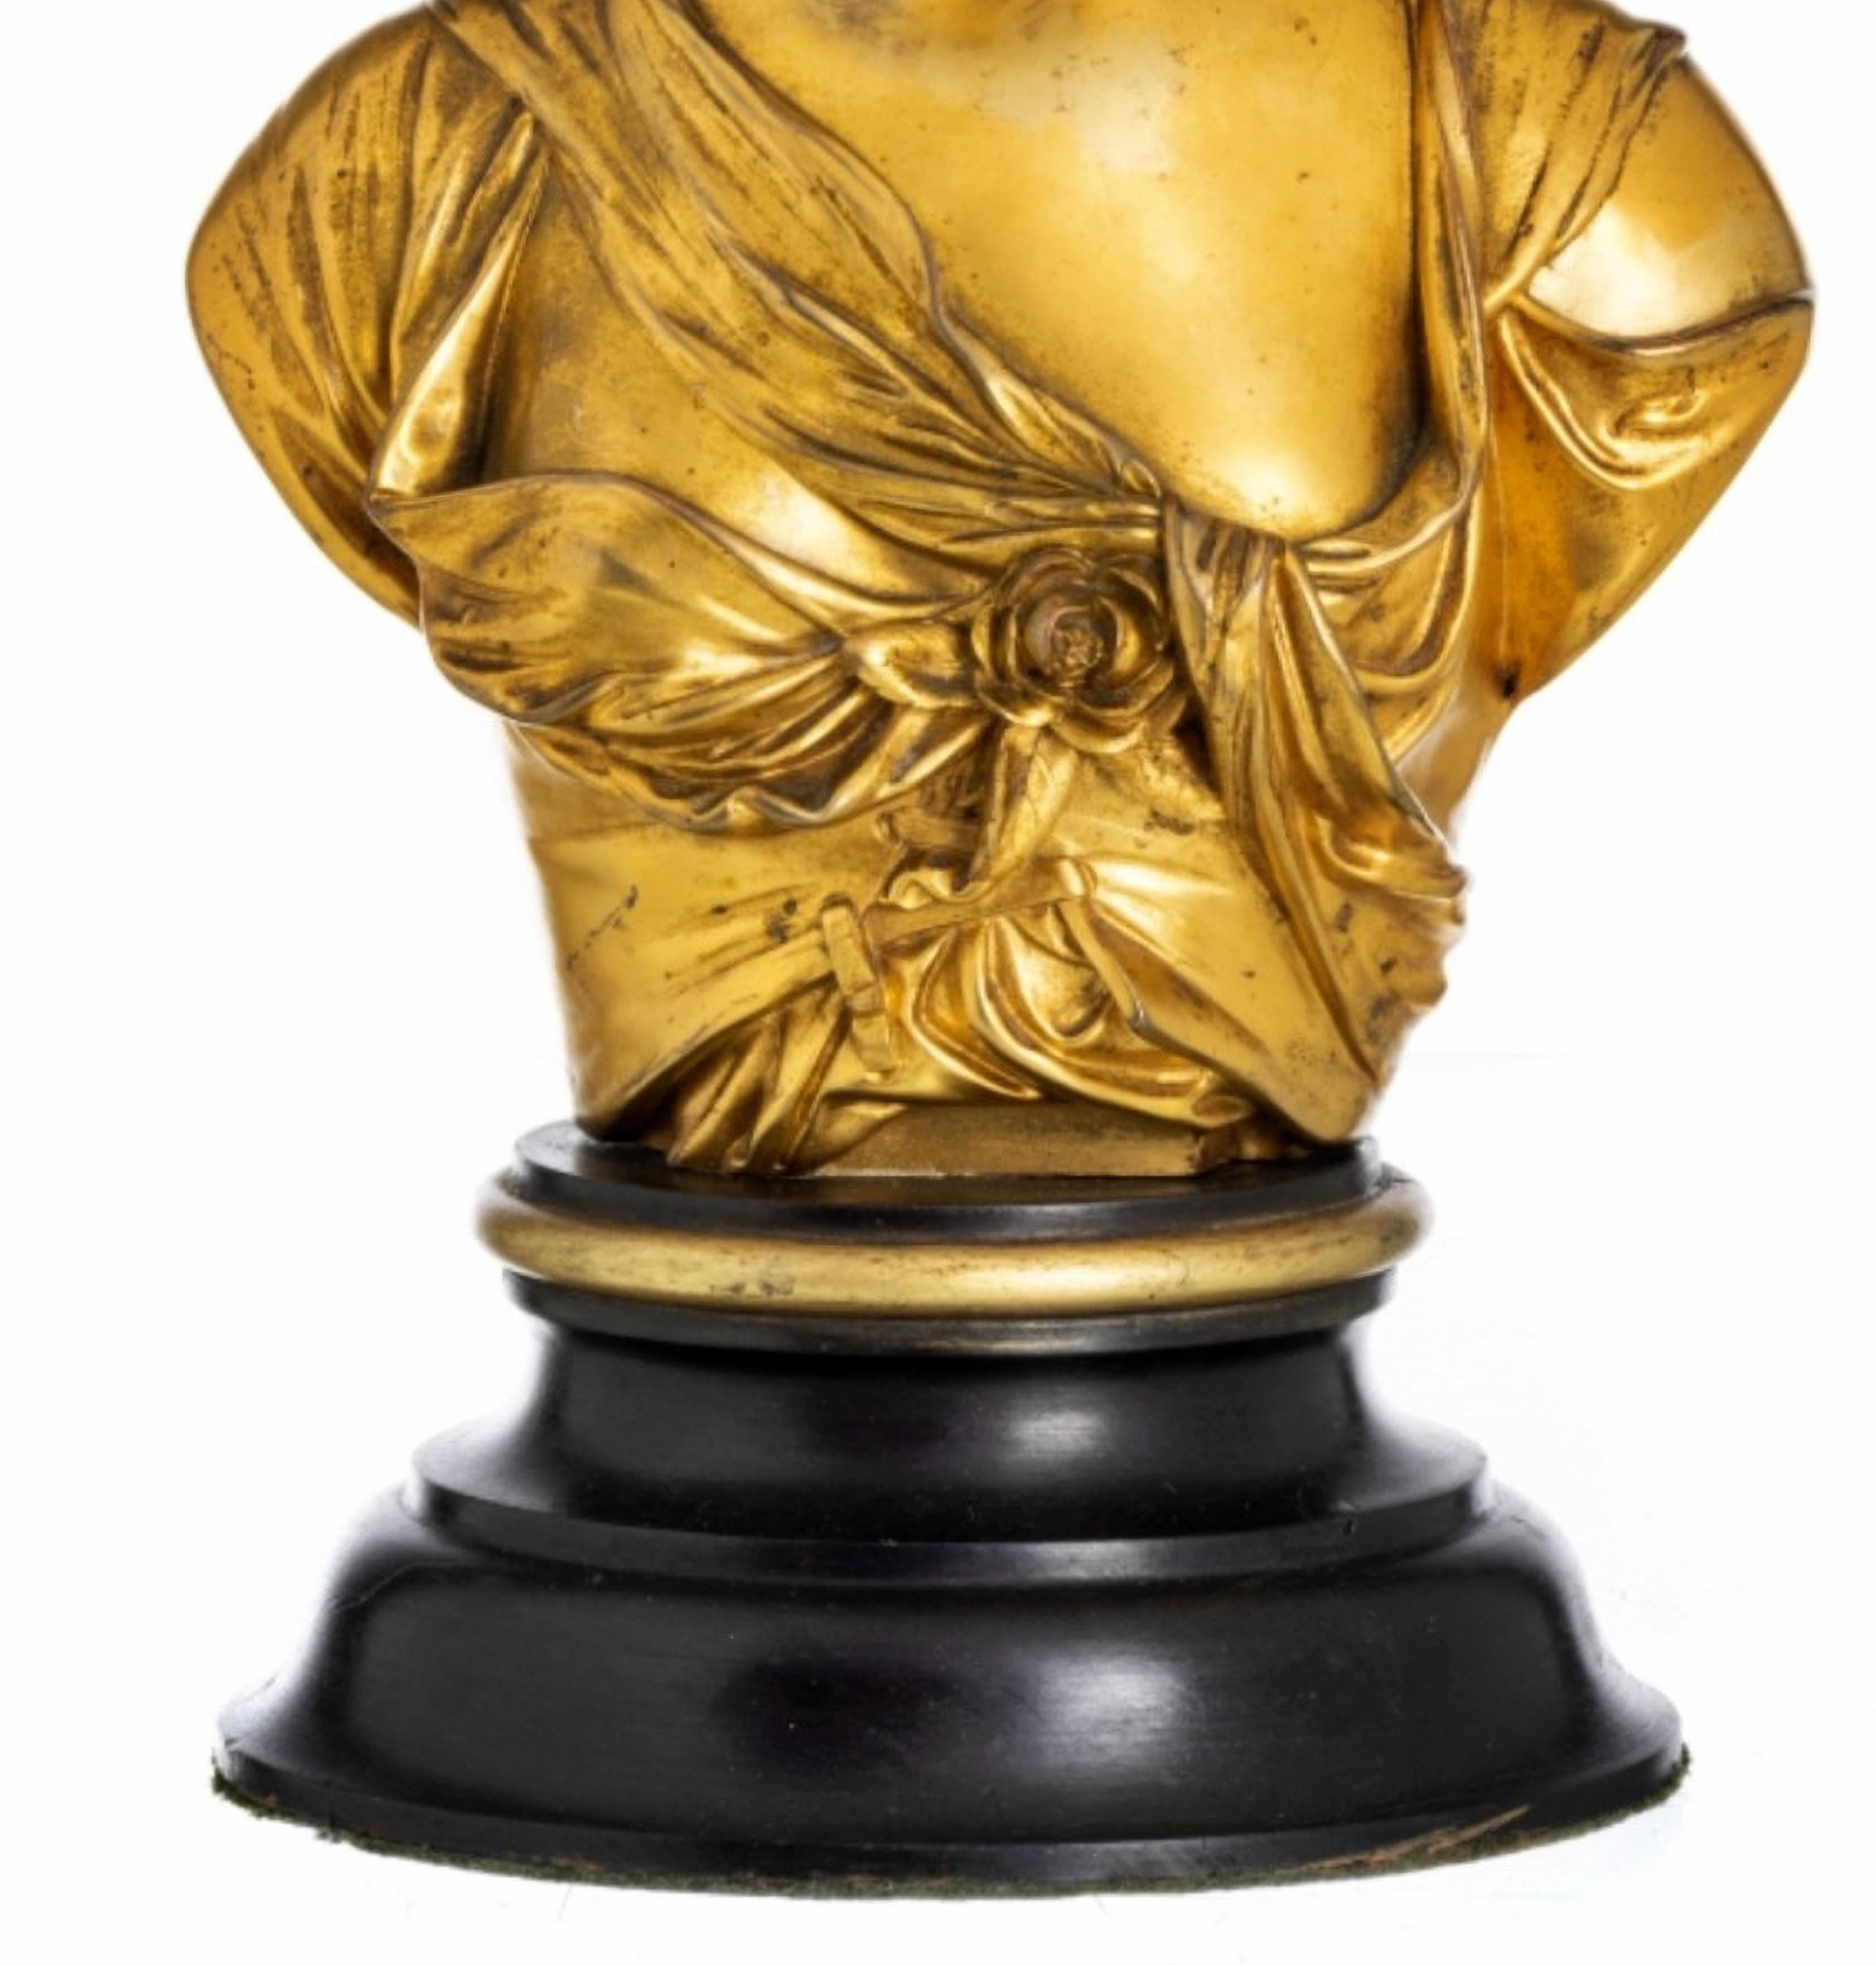 Female Figure Sculpture Léopold OUDRY (1854-1882)

Art bronze bust, set on a lacquered wooden base. Signed L.Oudry.
Height: (total) 40 cm
Good conditions.